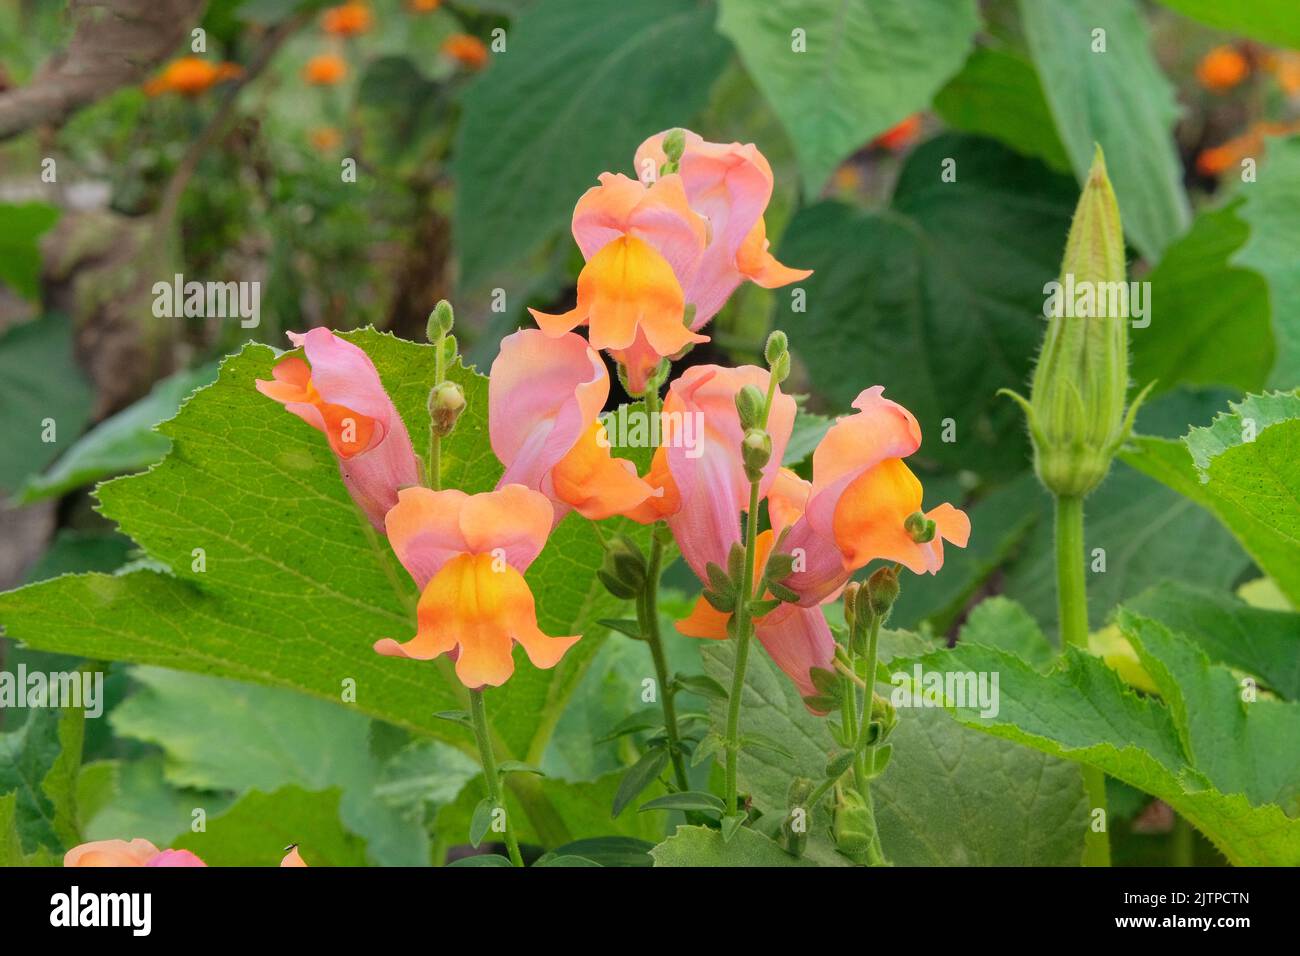 Flowers of beans is growing in rural garden. Bed in the garden. Blooming plants in farming. Stock Photo